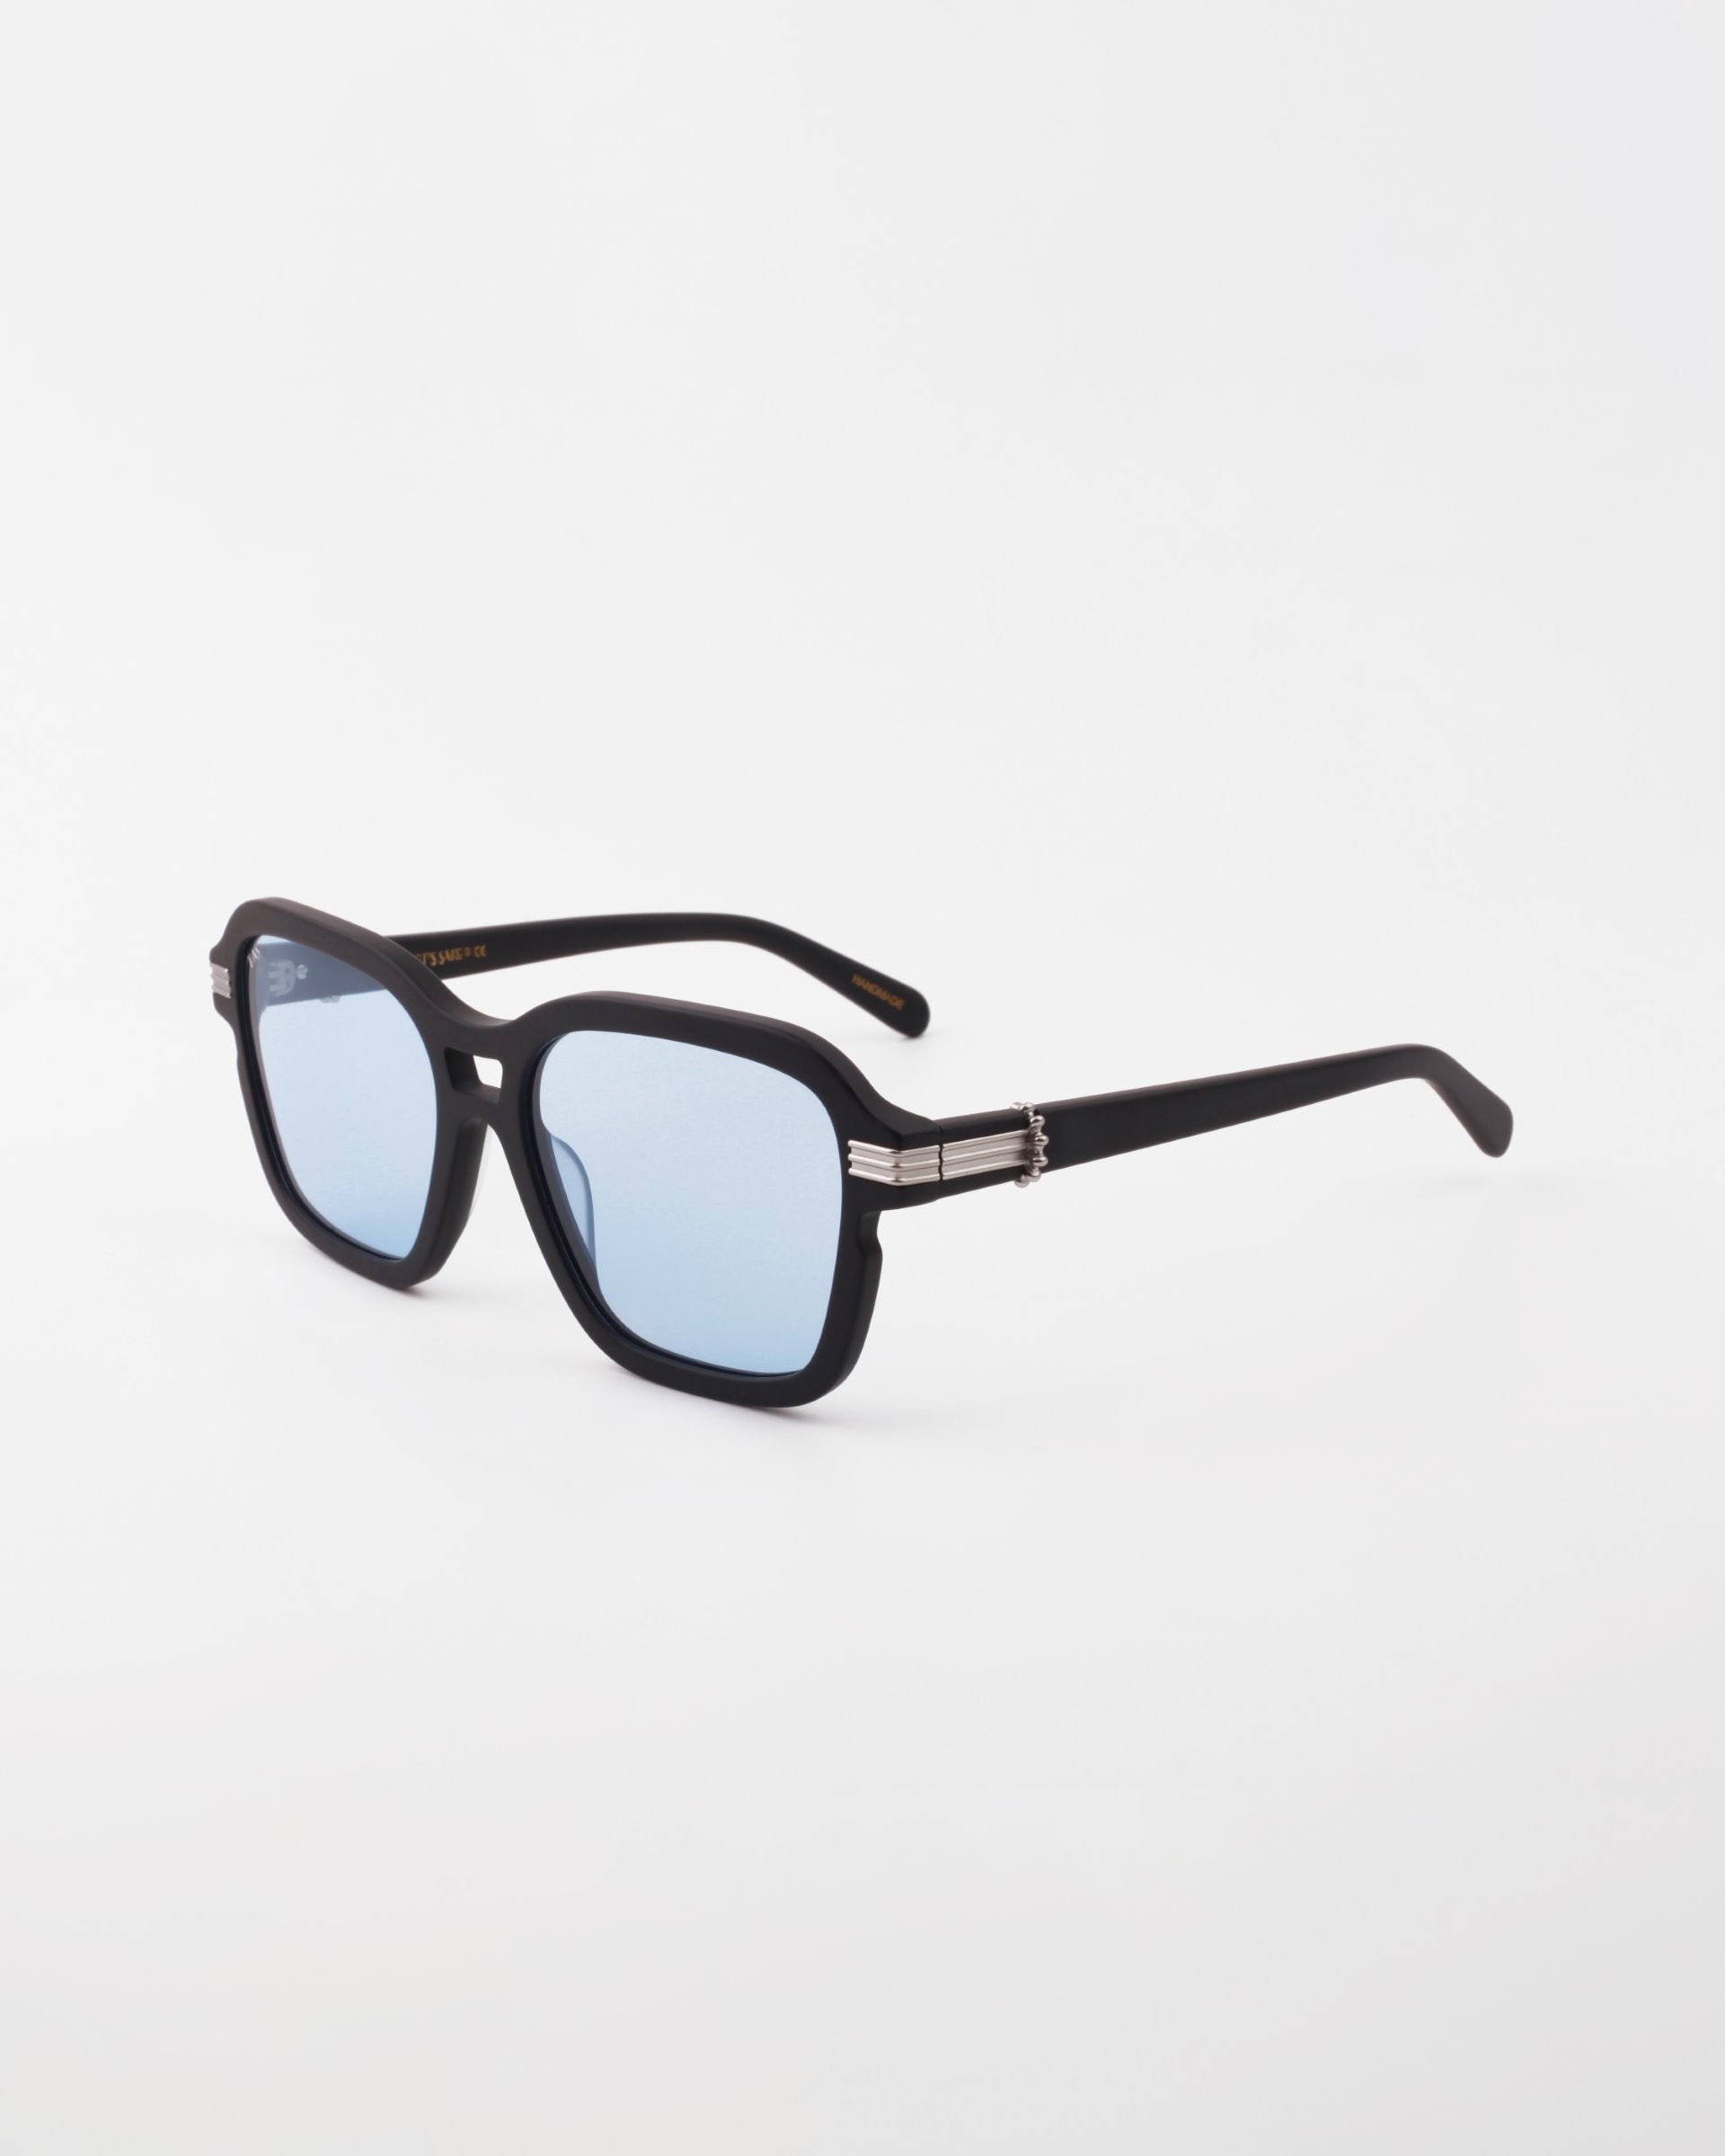 A pair of black-framed Shadyside sunglasses from For Art&#39;s Sake® with light blue, shatter-resistant nylon lenses. The hand-polished acetate arms feature a distinctive metallic decorative element near the hinges. The Shadyside sunglasses are placed against a plain white background.